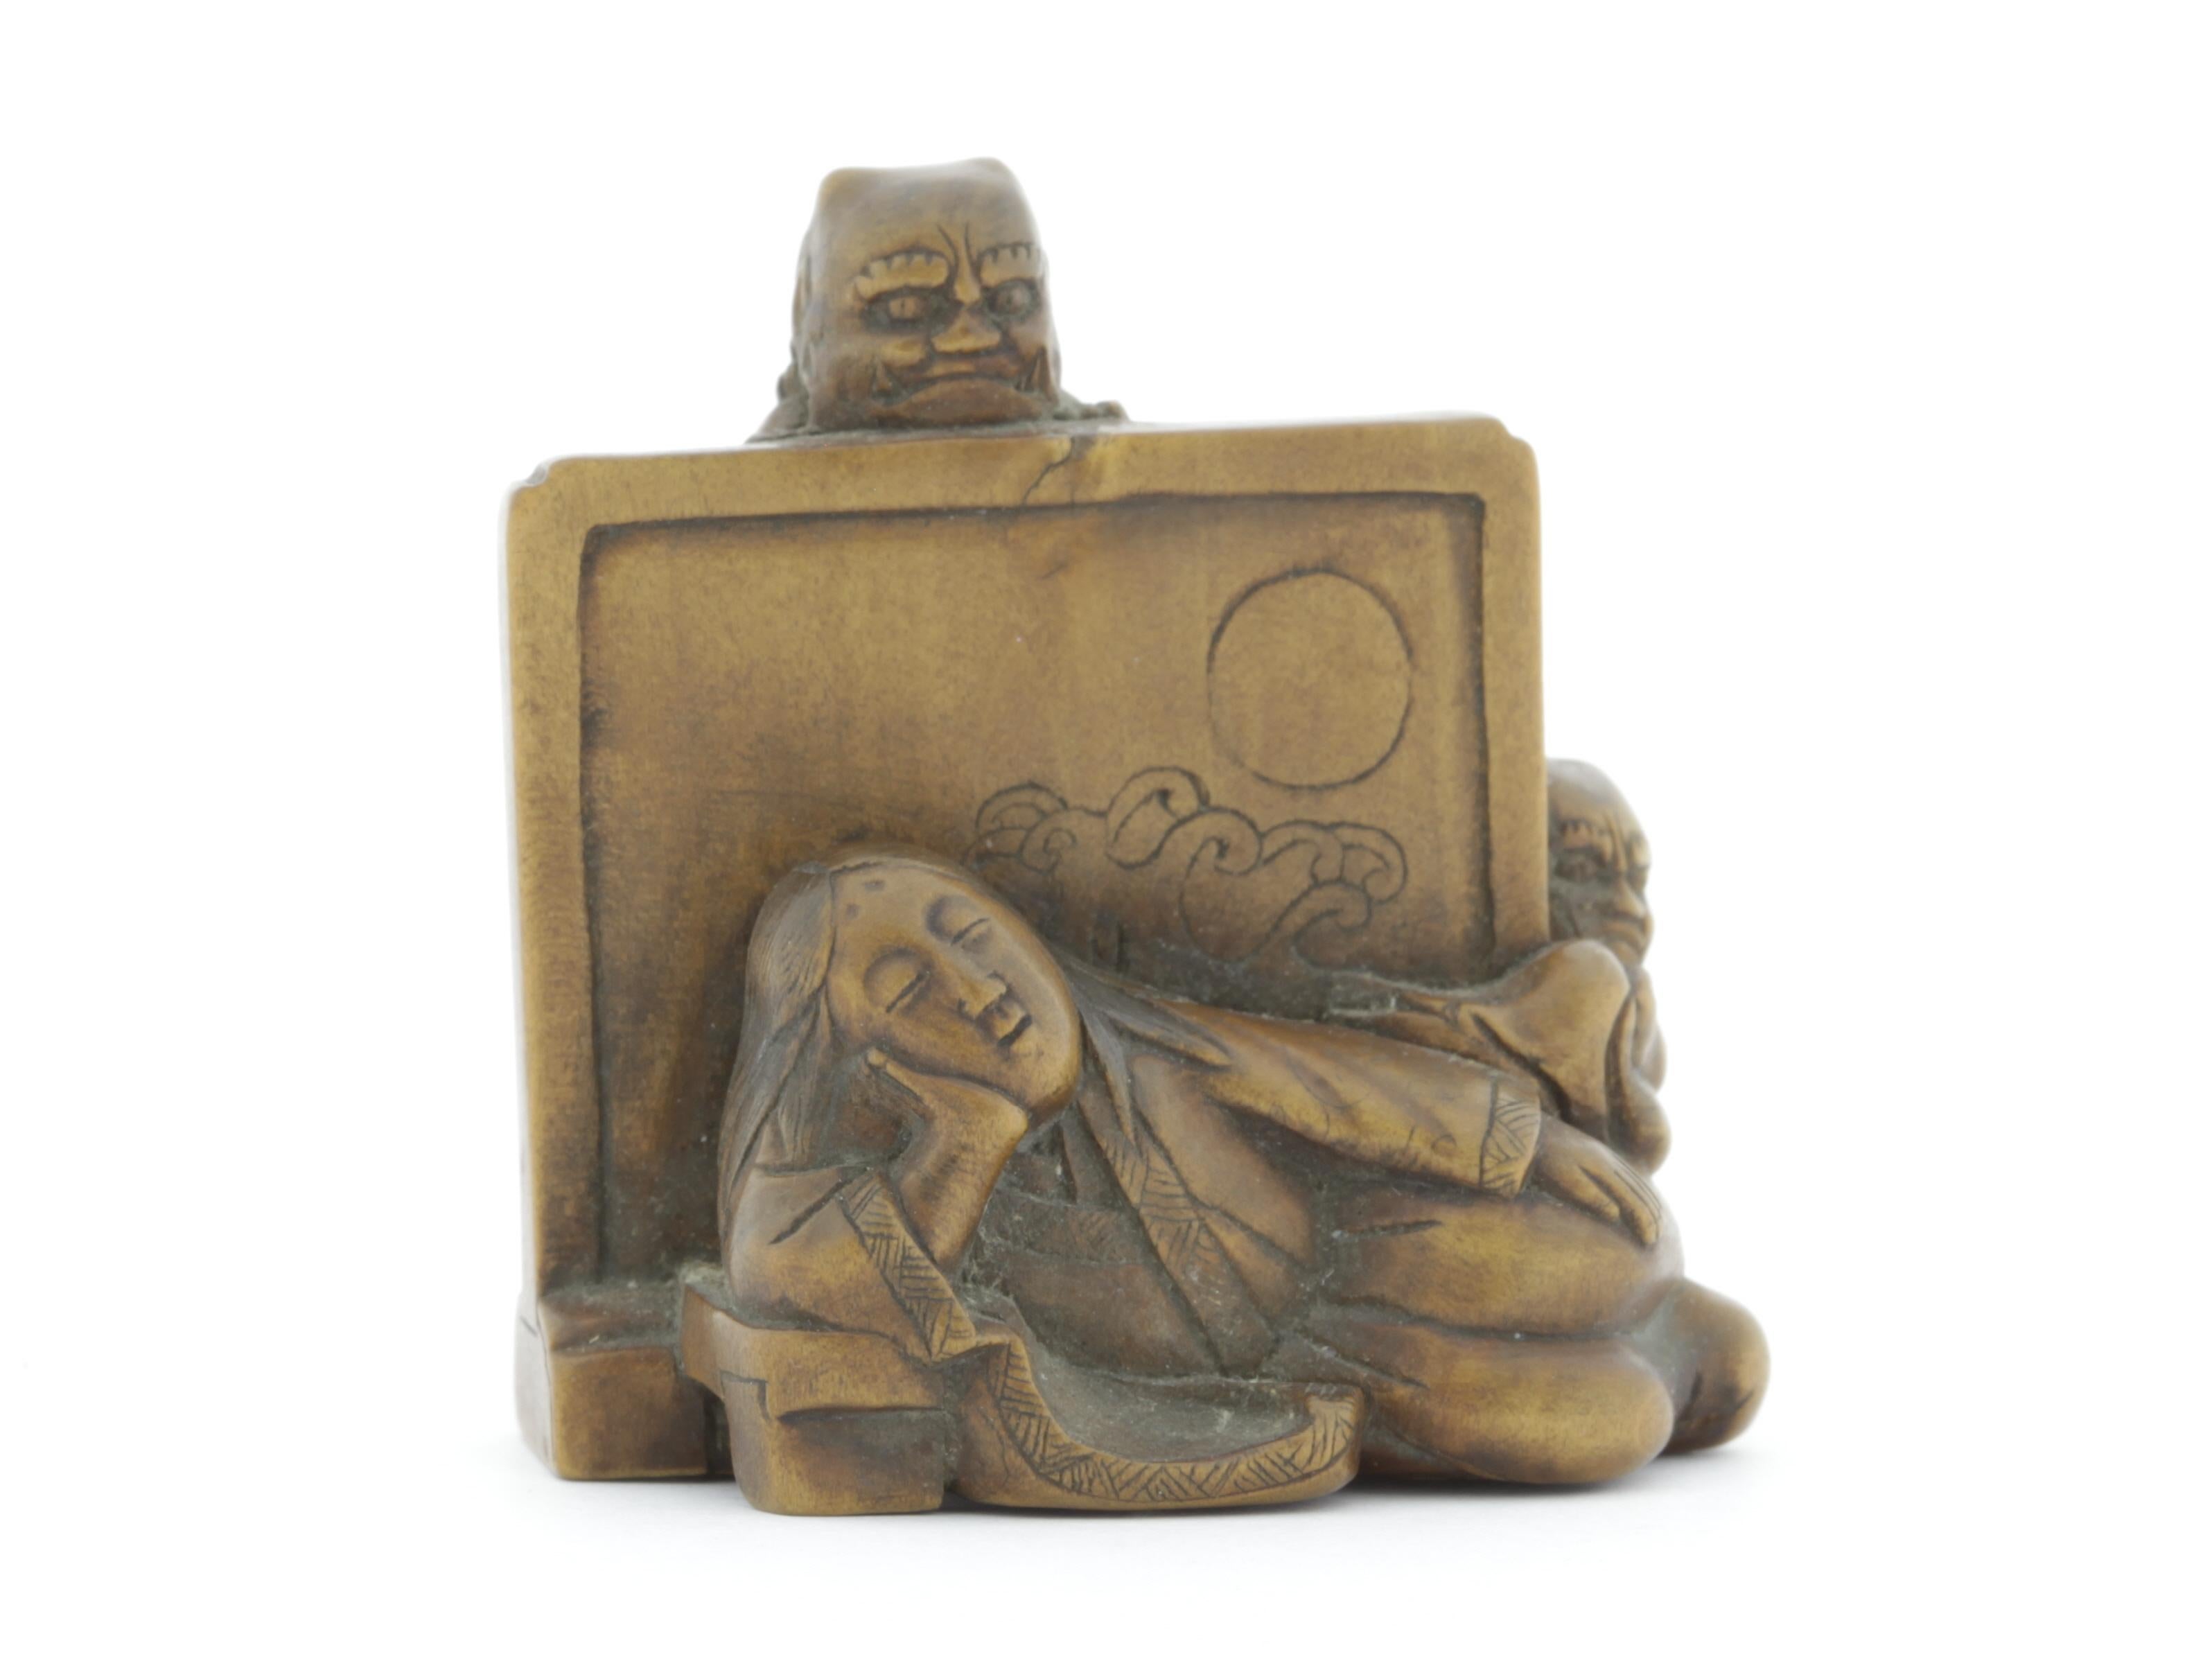 This netsuke is made entirely out of wood and depicts a sleeping lady being watched by two oni (demons). Her long hair is loose and her eyebrows are carved high above on her forehead, suggesting her noble background. The screen behind her shows a